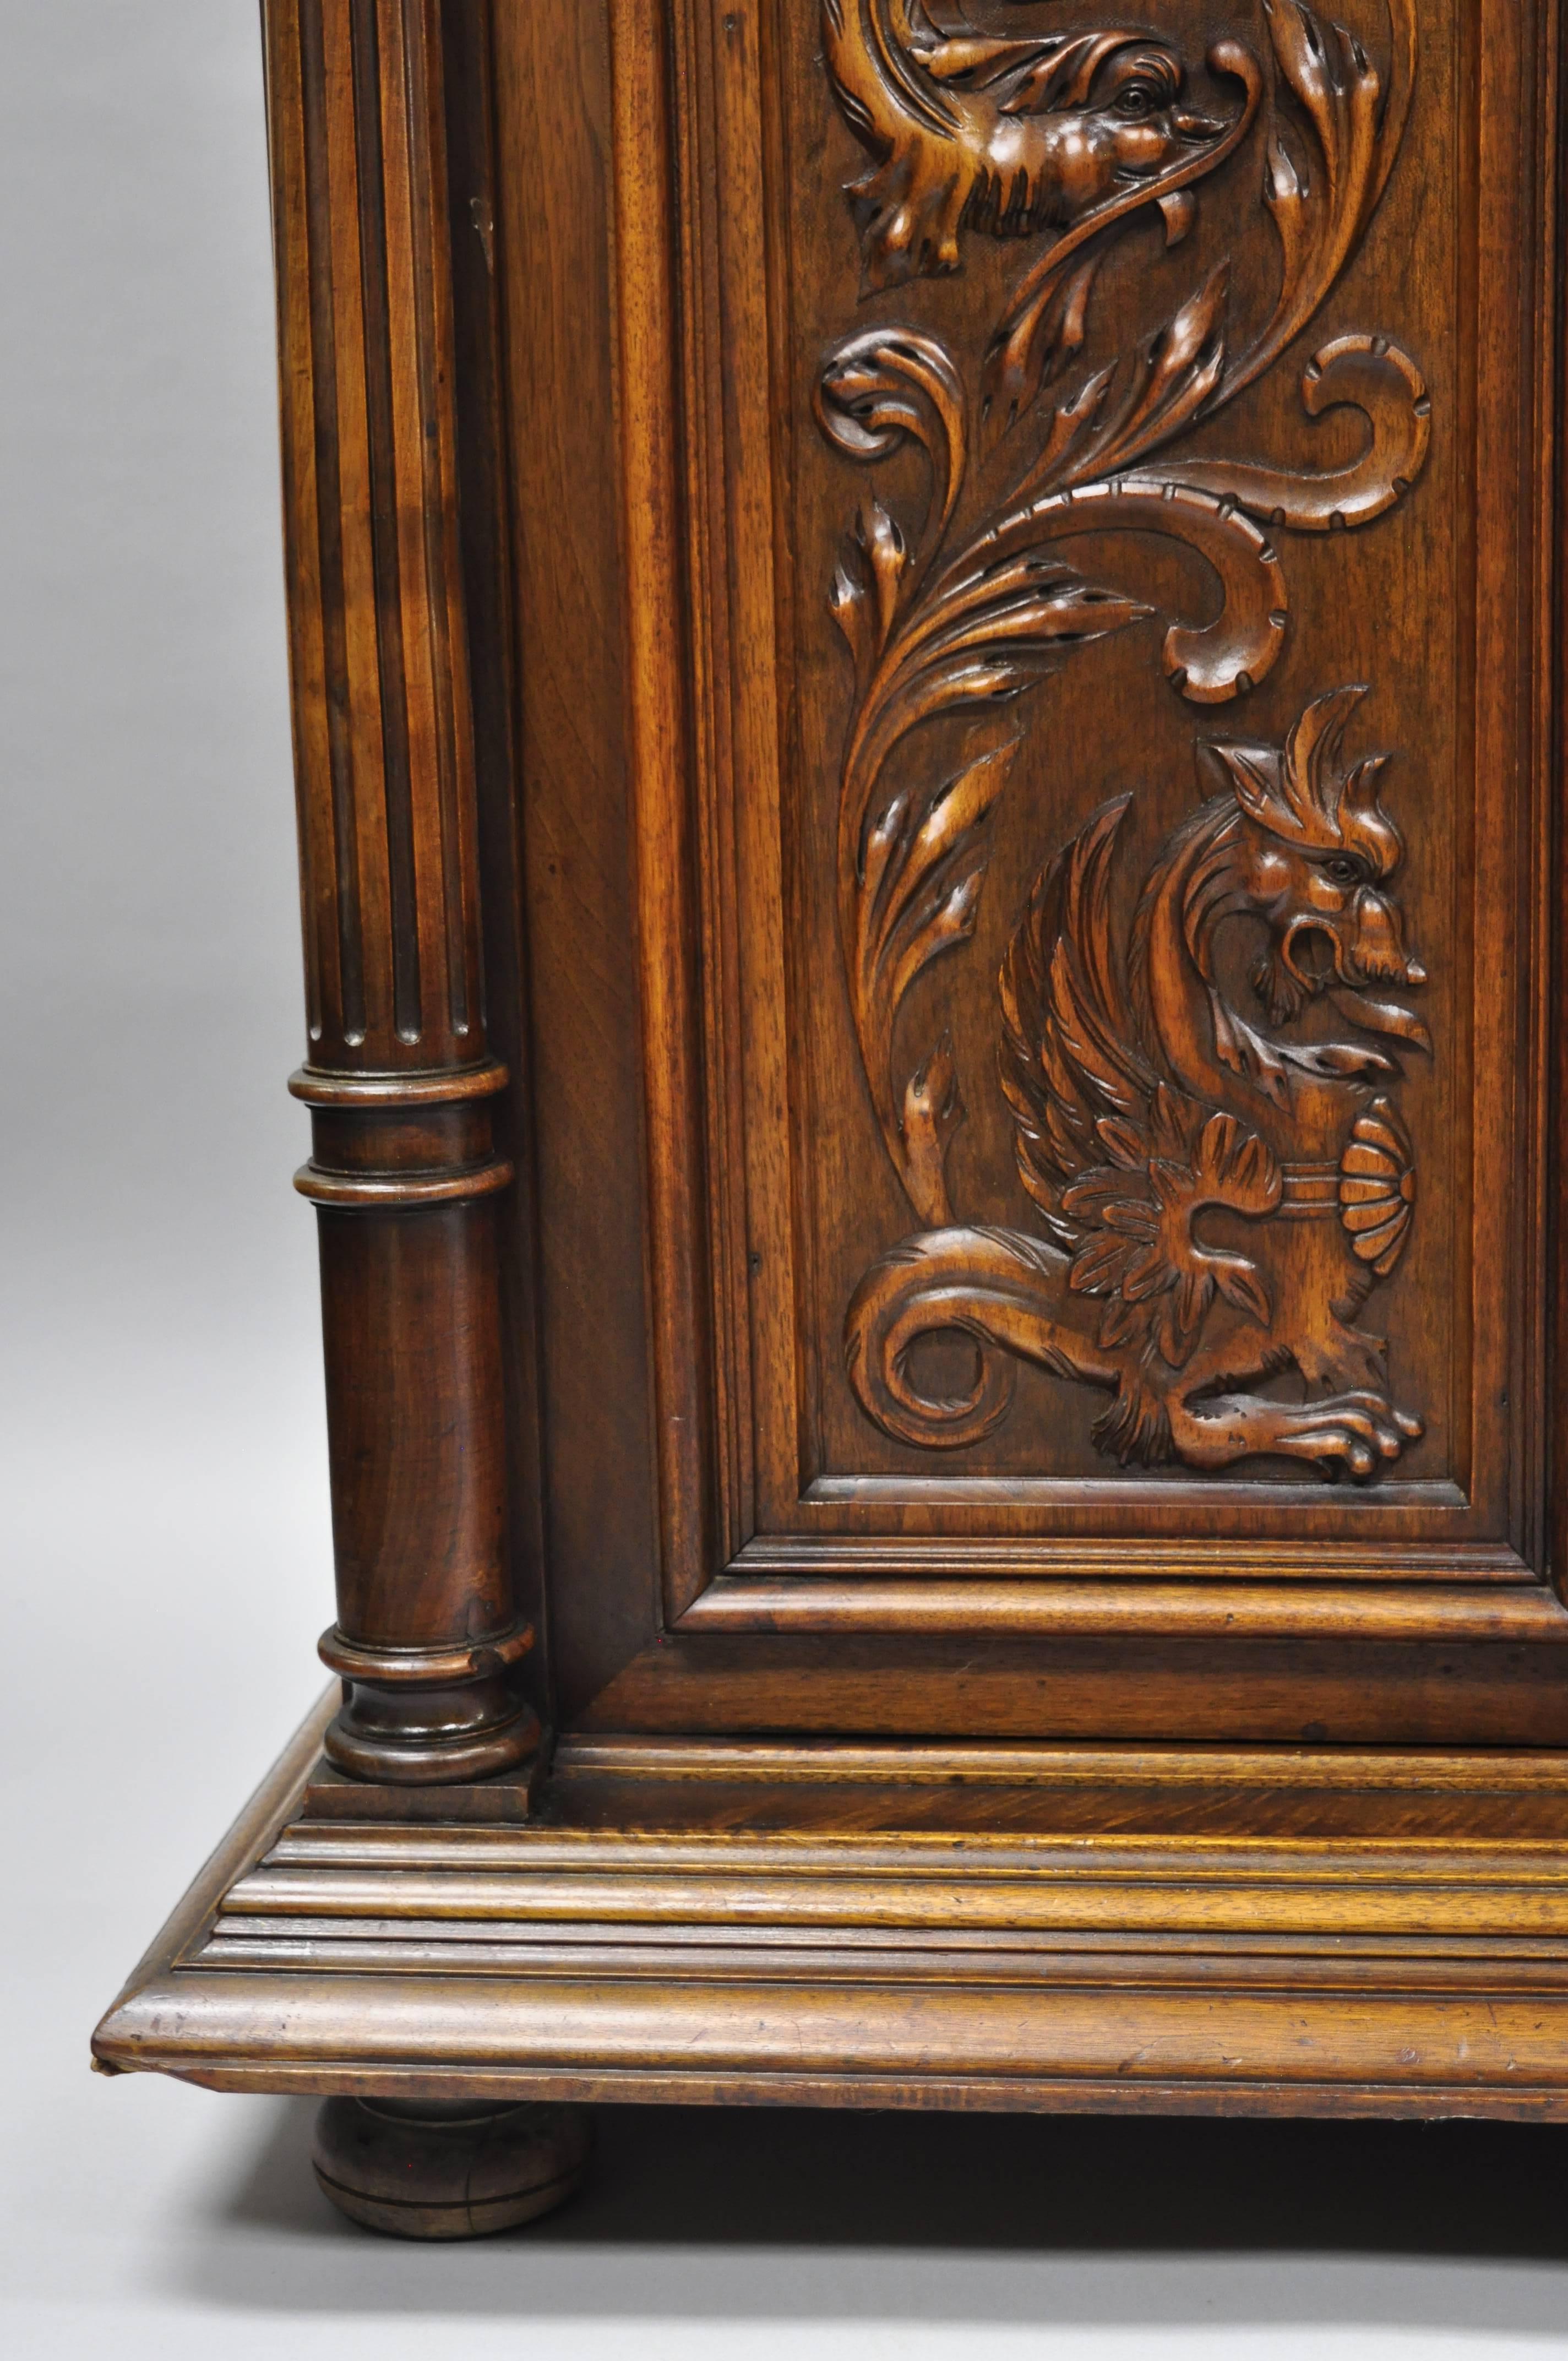 European Gothic Renaissance Revival Carved Walnut Dragon Griffin Sideboard Hutch Cabinet For Sale